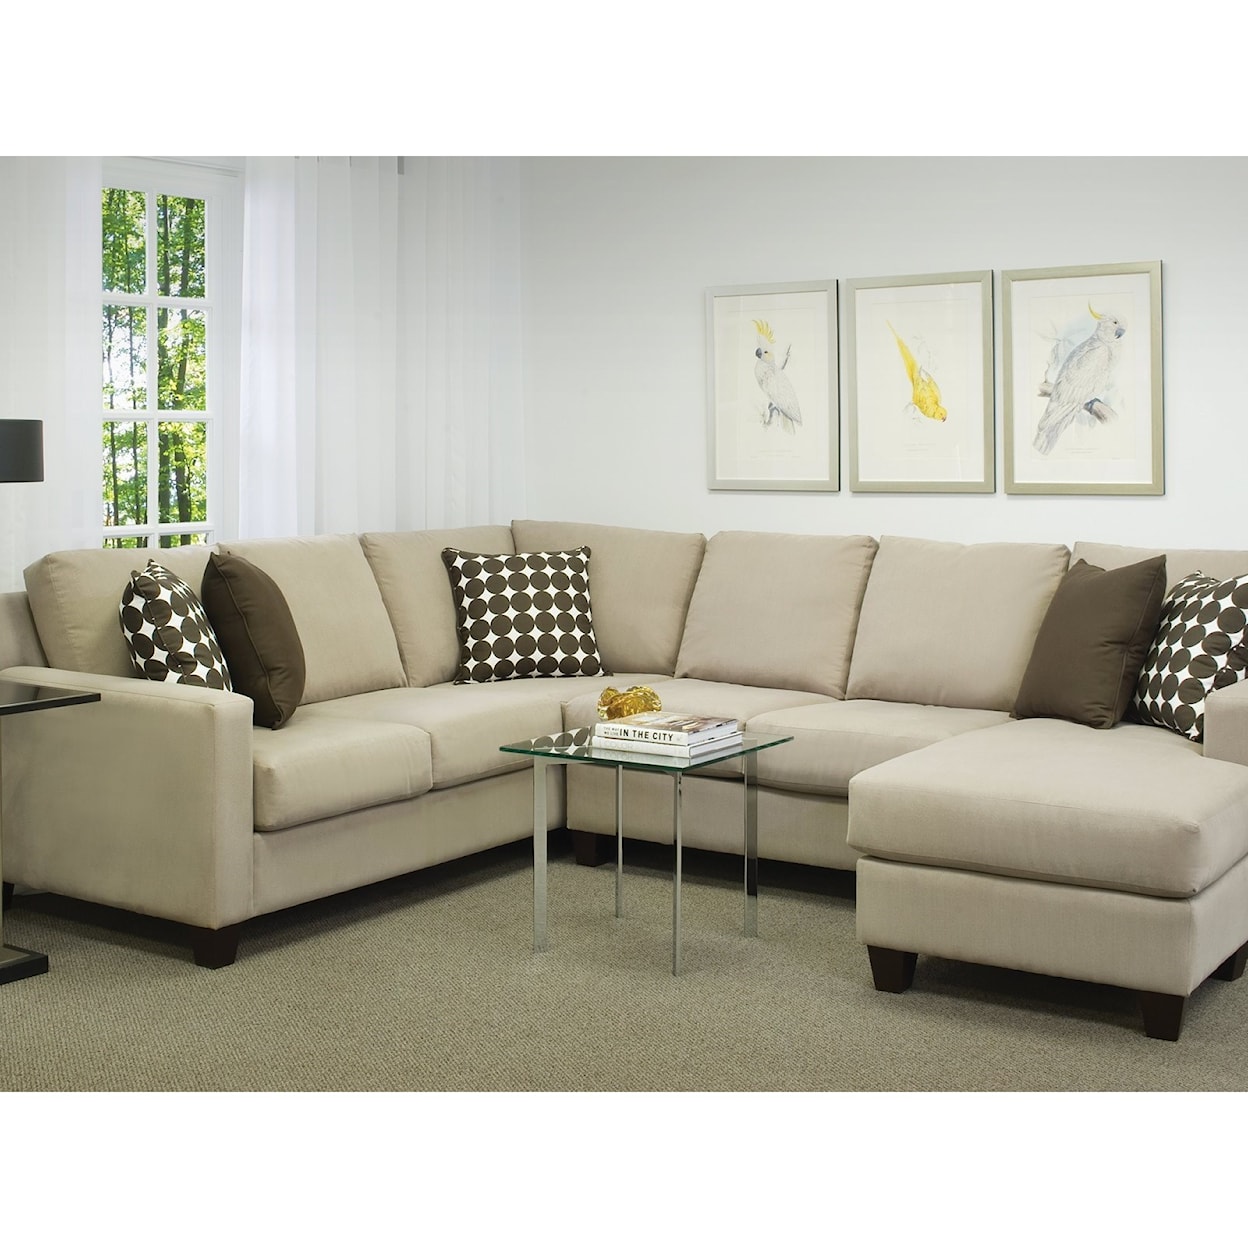 Brentwood Classics Finley 2 Piece Sectional with Chaise